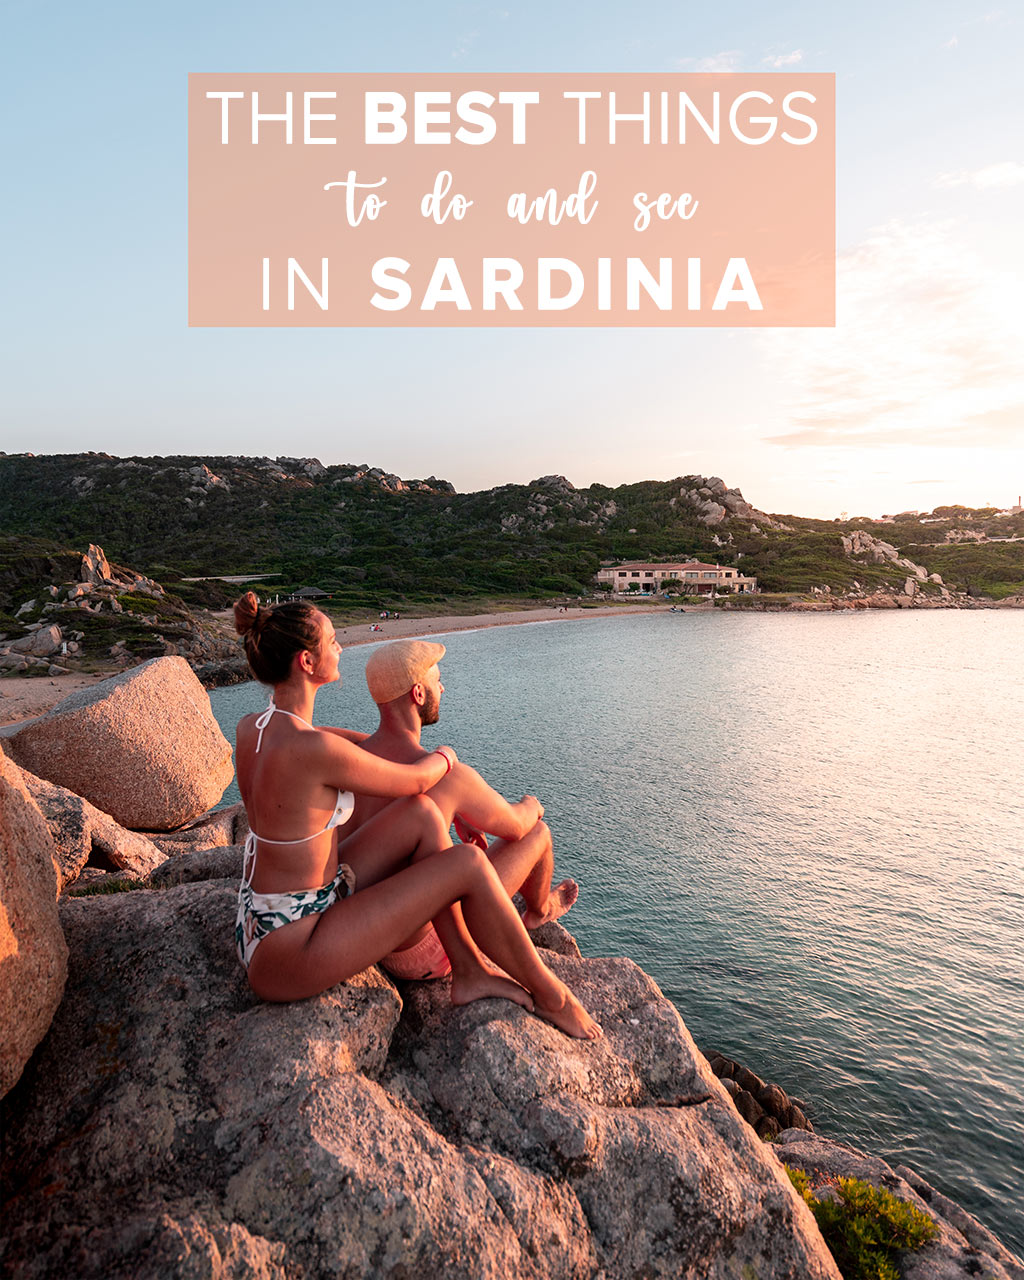 the best things to do and see in sardinia
